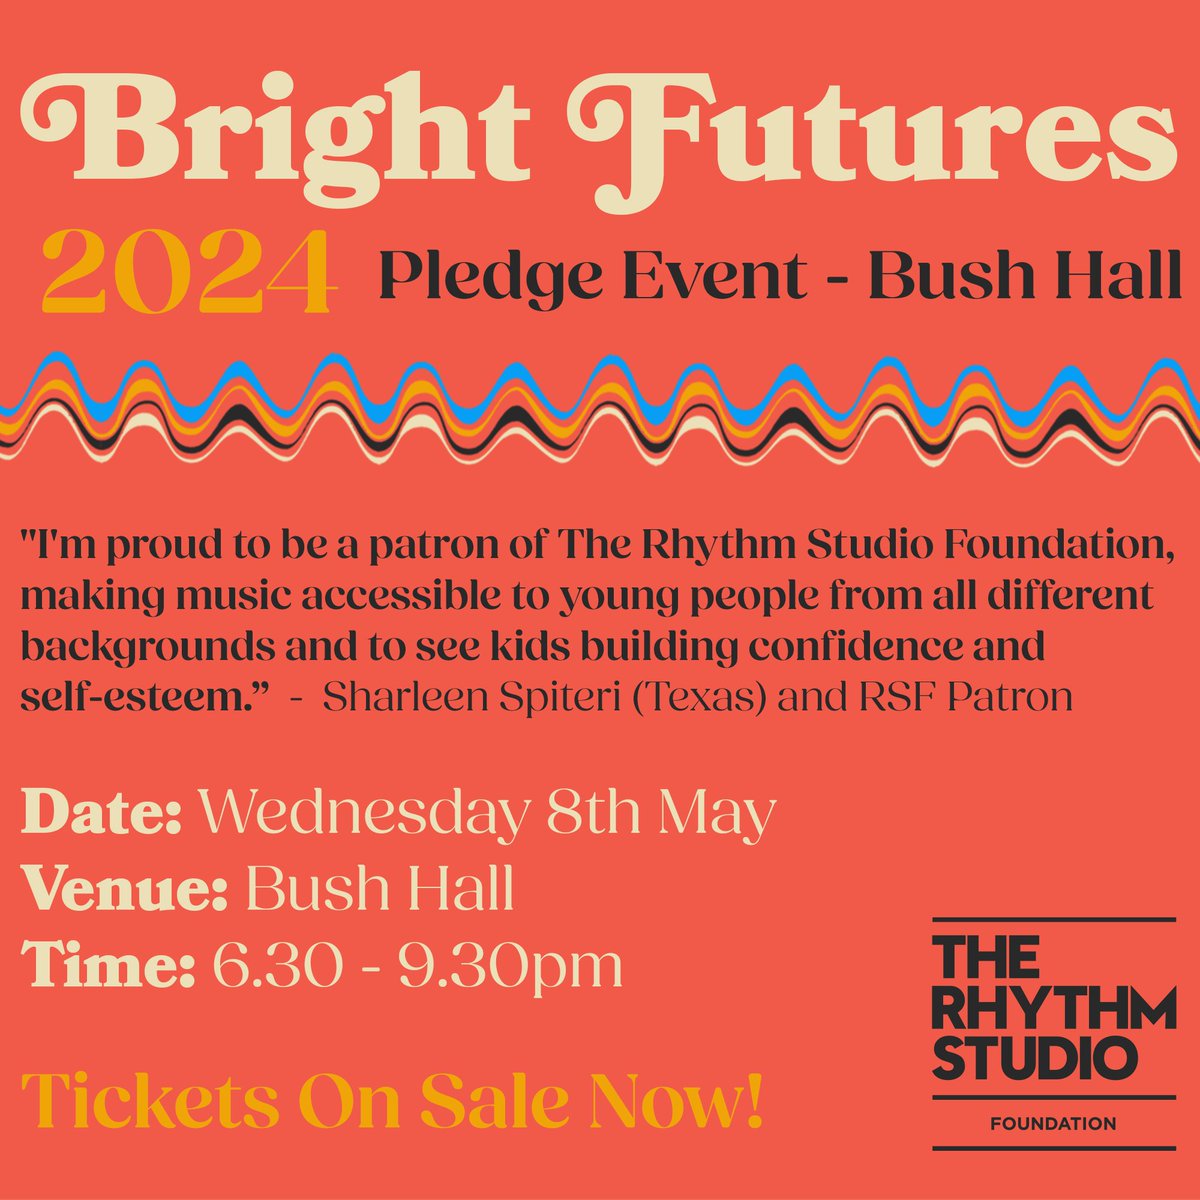 Tickets on sale now for a great night of music at our fabulous Bright Futures 2024 fundraising event at @Bushhallmusic - Please consider making a donation if you can’t make it! Get your tickets here: ww2.emma-live.com/brightfutures2…